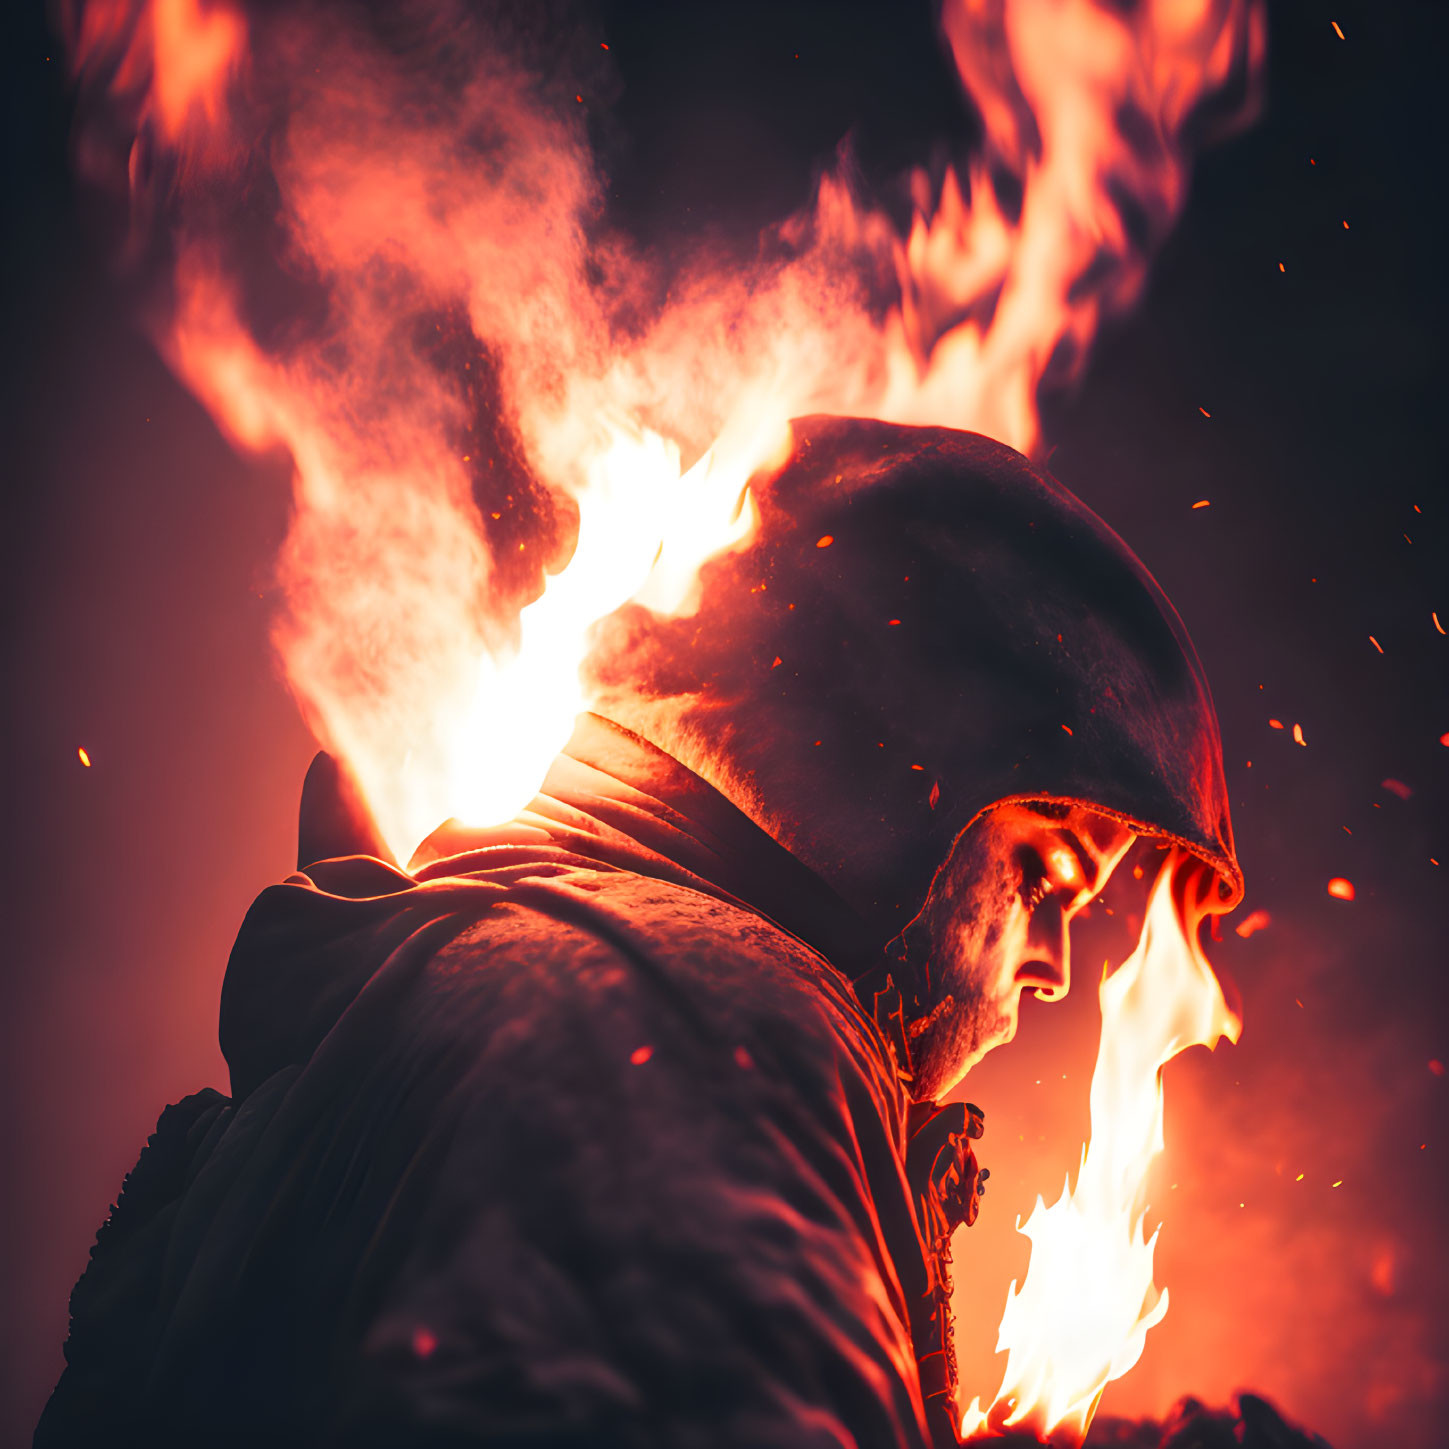 Firefighter in Protective Gear Surrounded by Flames and Sparks at Night